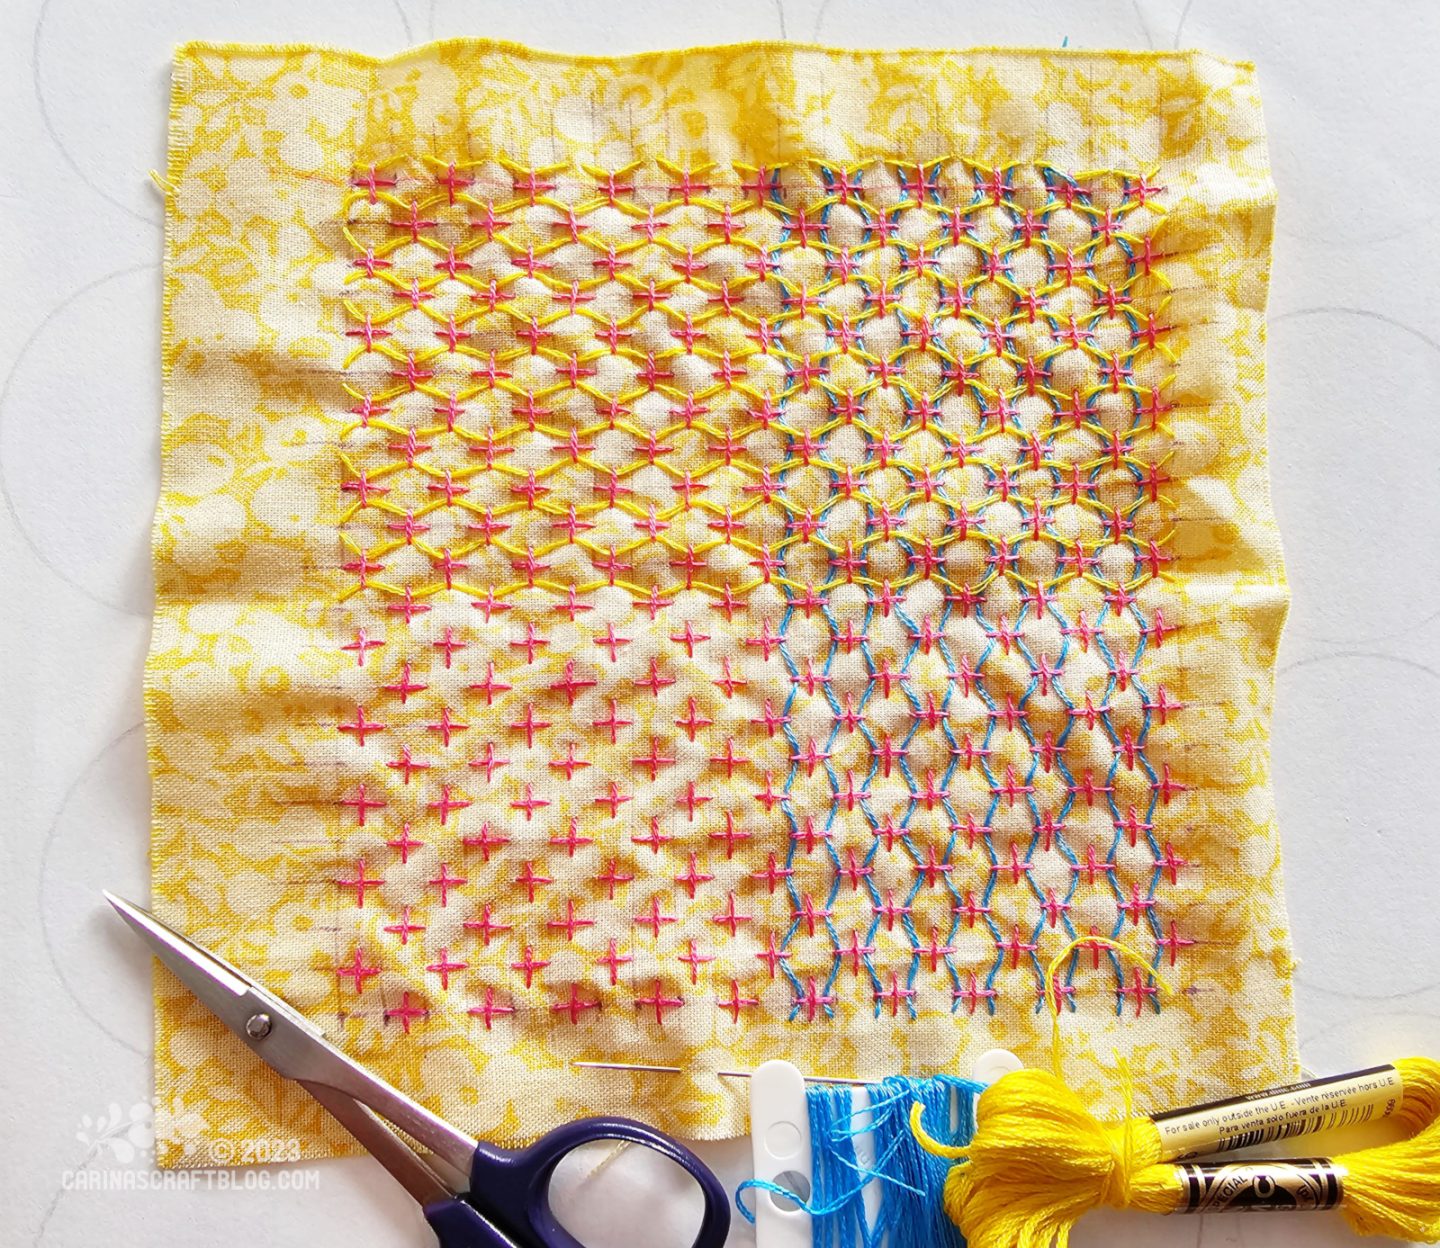 Over head view of a square of yellow fabric. On the fabric is stitched a pattern of crosses with thread woven through the points of the crosses.